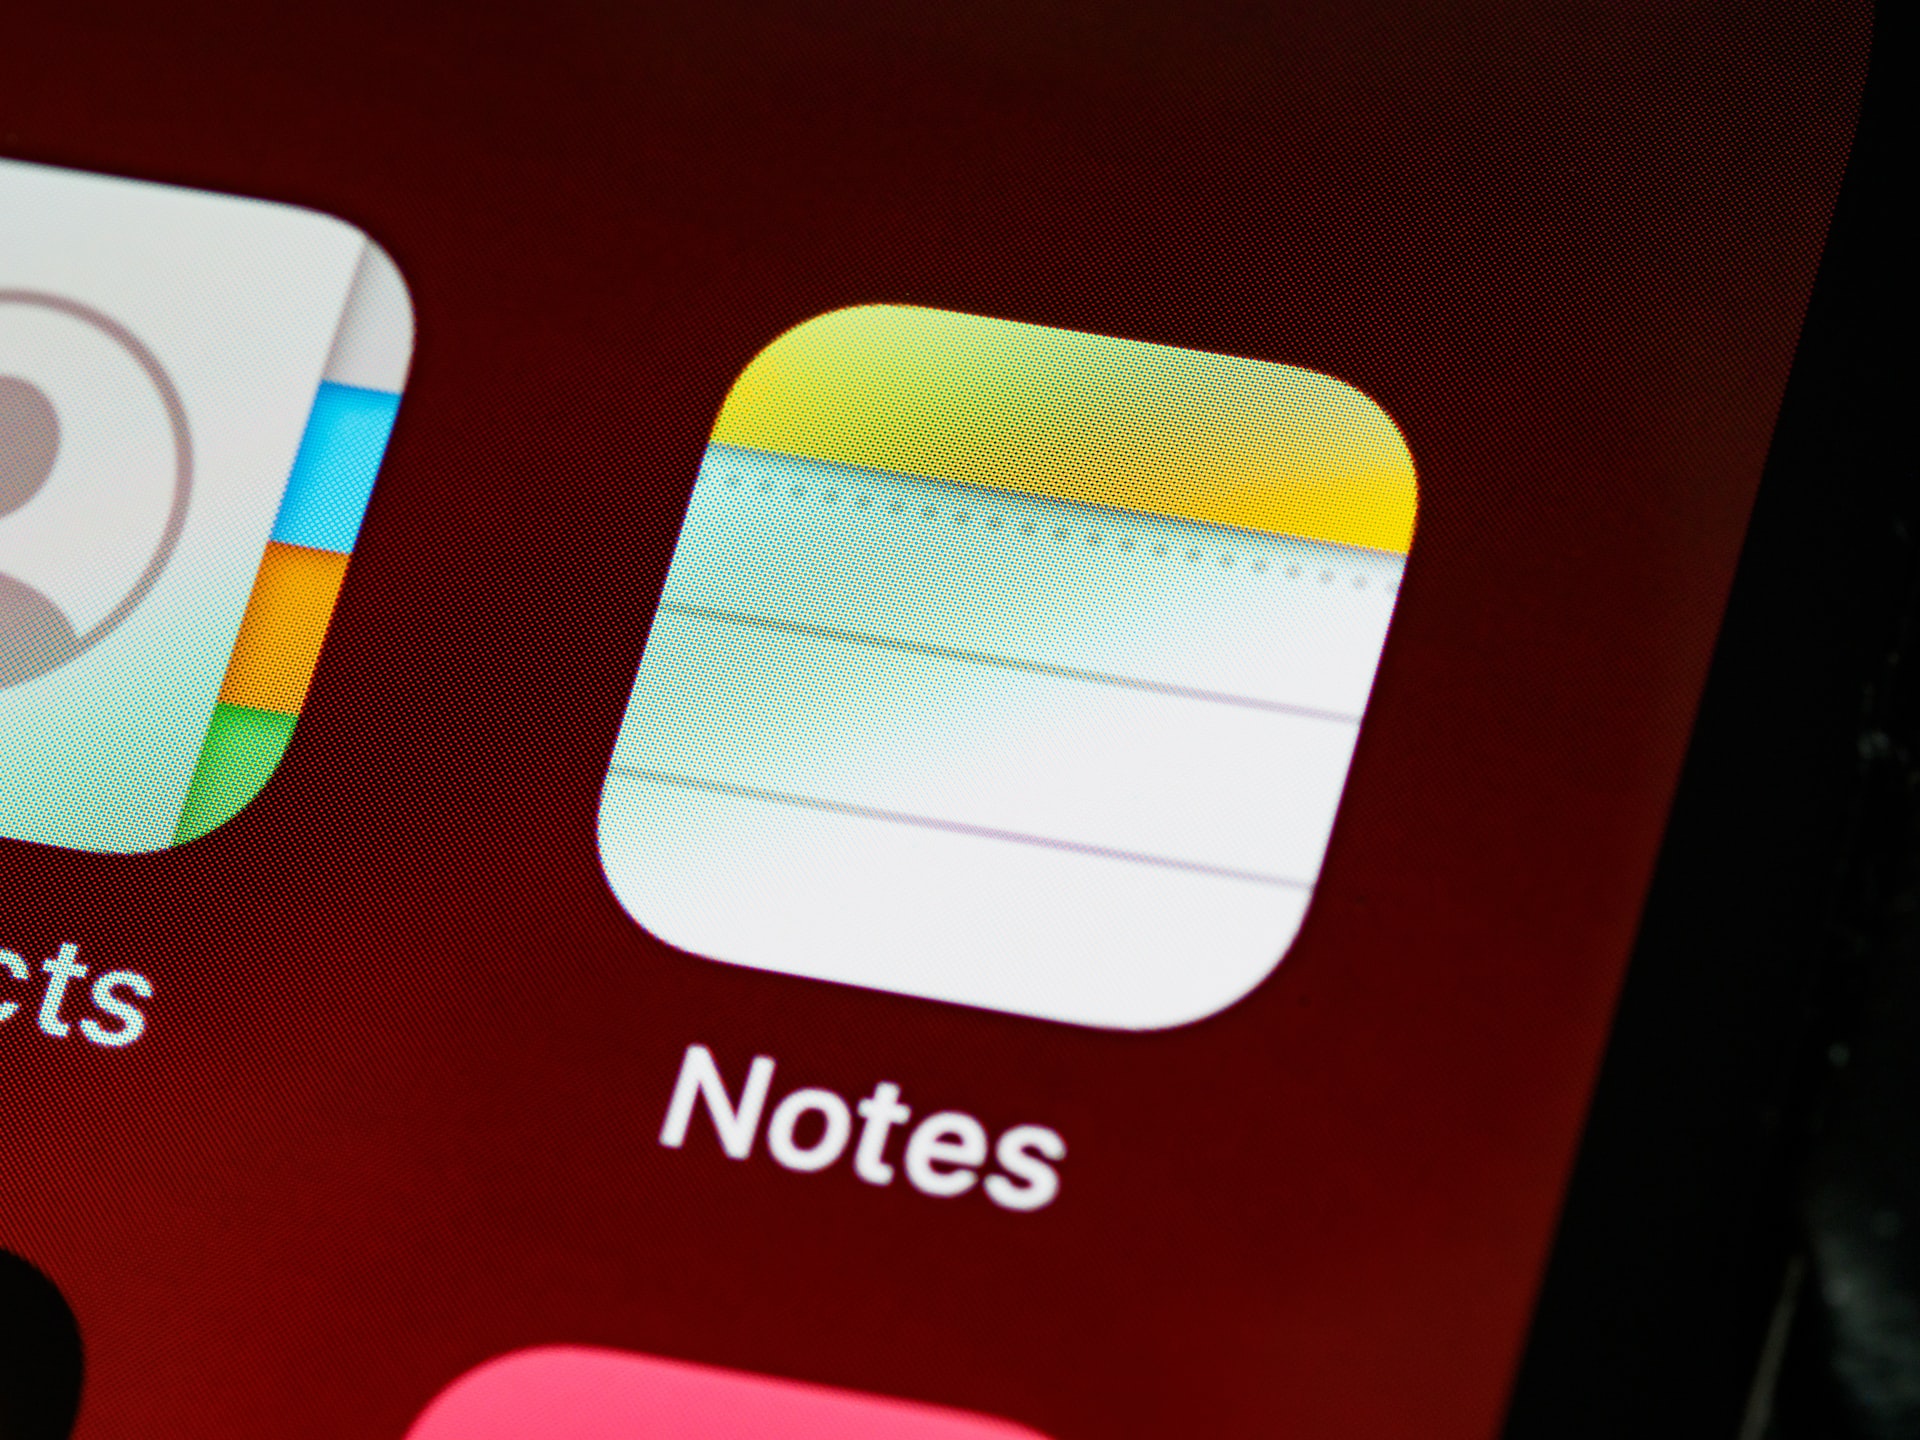 The Best Note-Taking Apps for Staying Organized and on Task